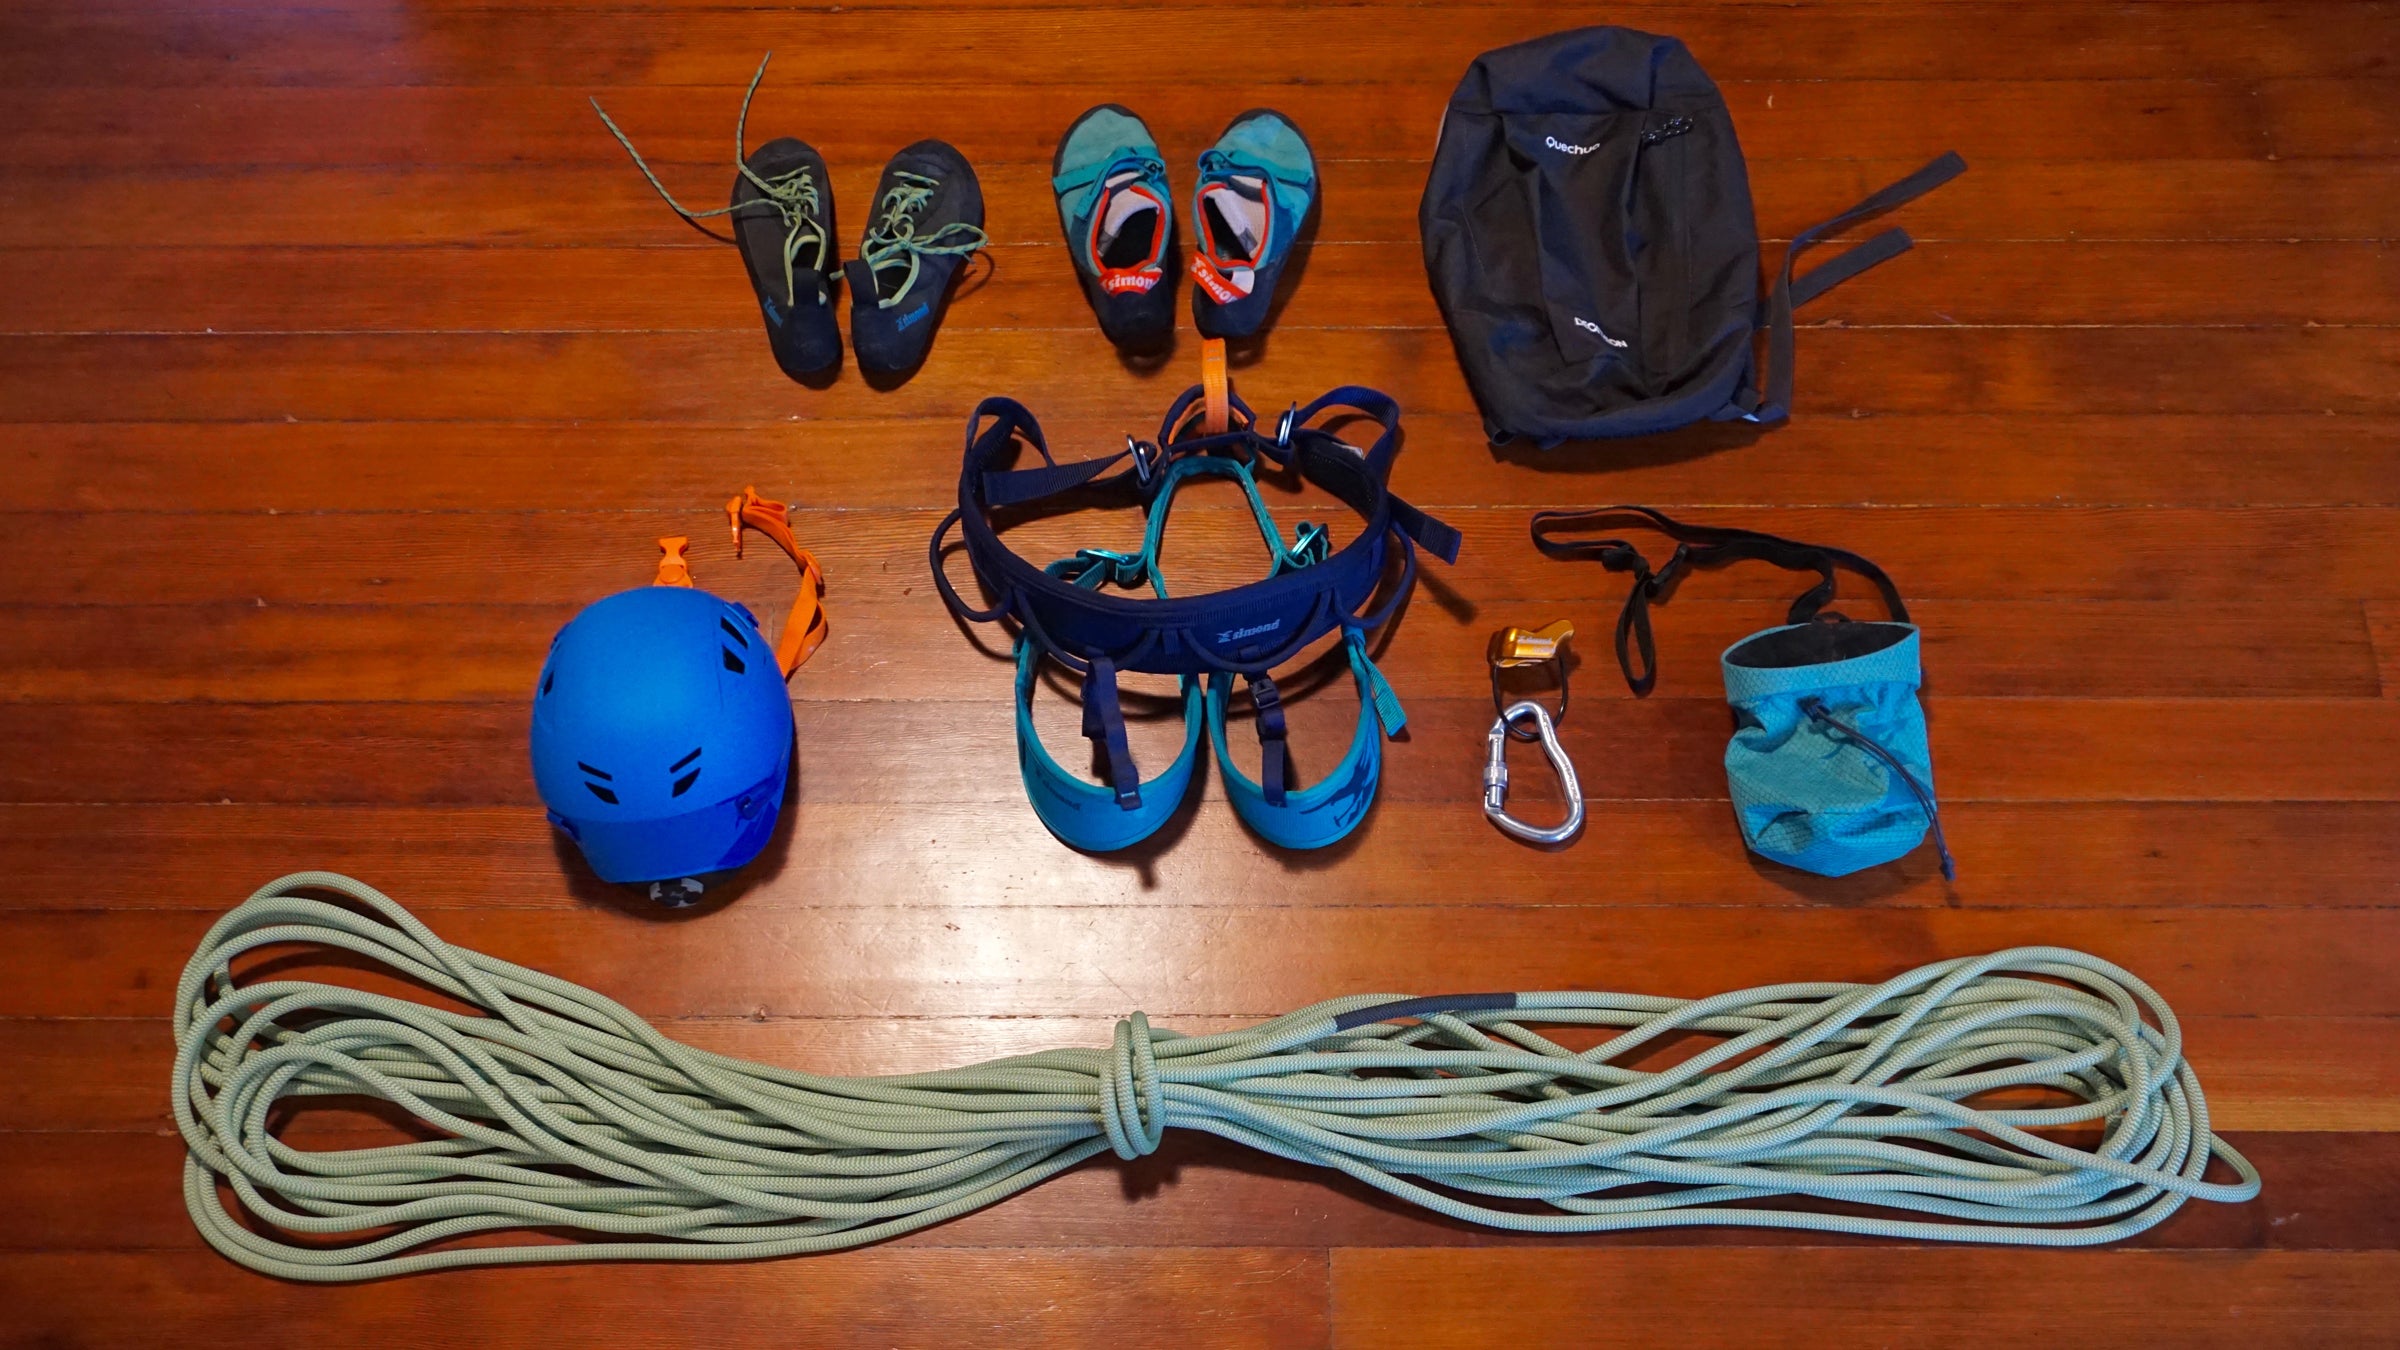 We Got This Gym Climbing Kit for Under $150